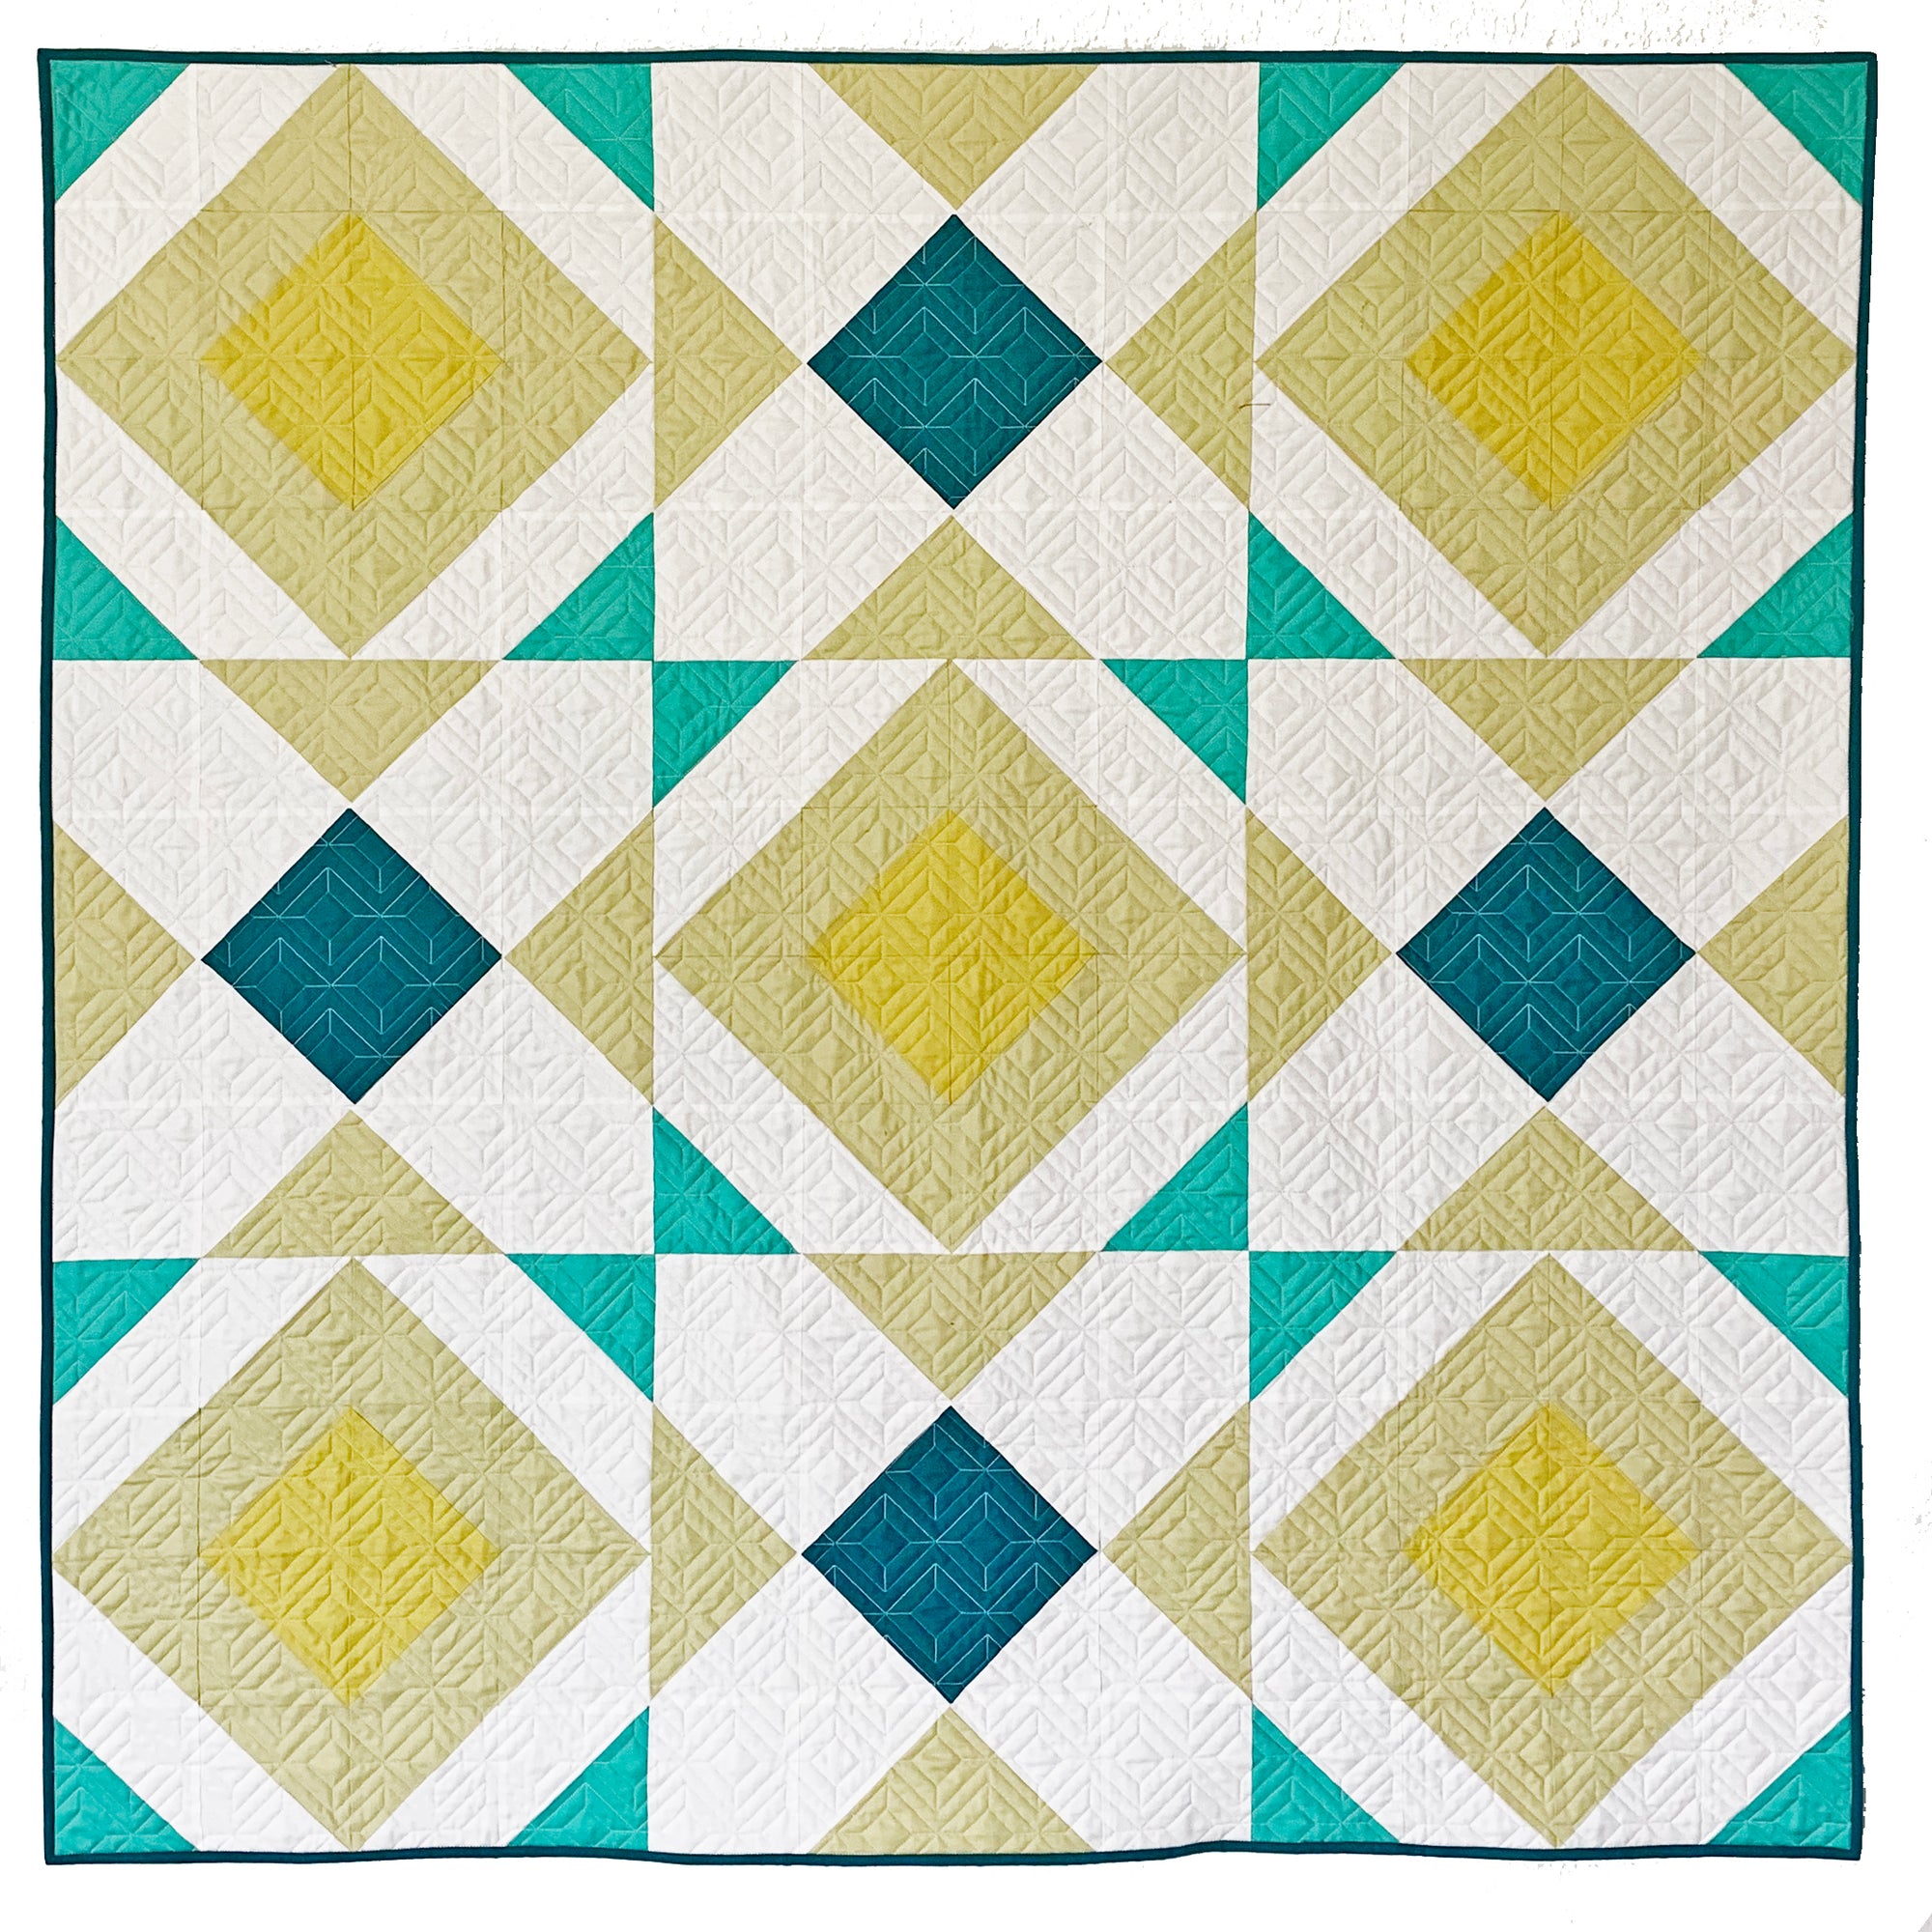 Noughts and Crosses Quilt Pattern - PDF